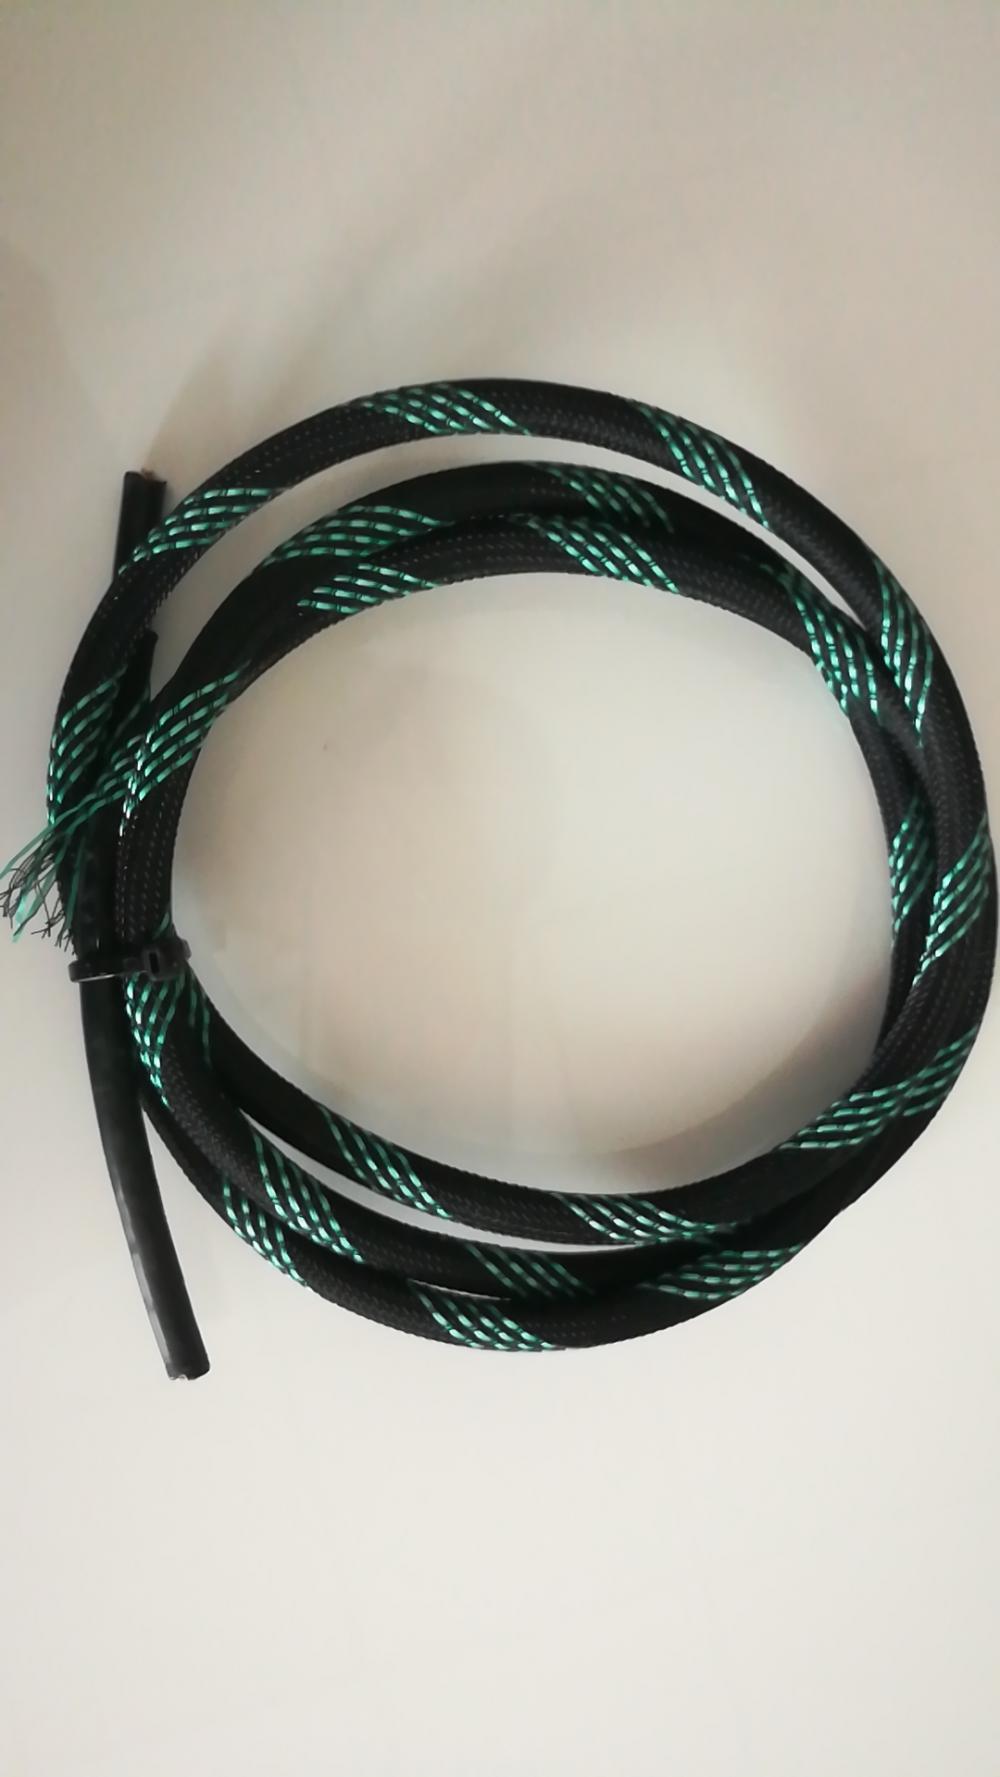 heat sleeve for electrical cable